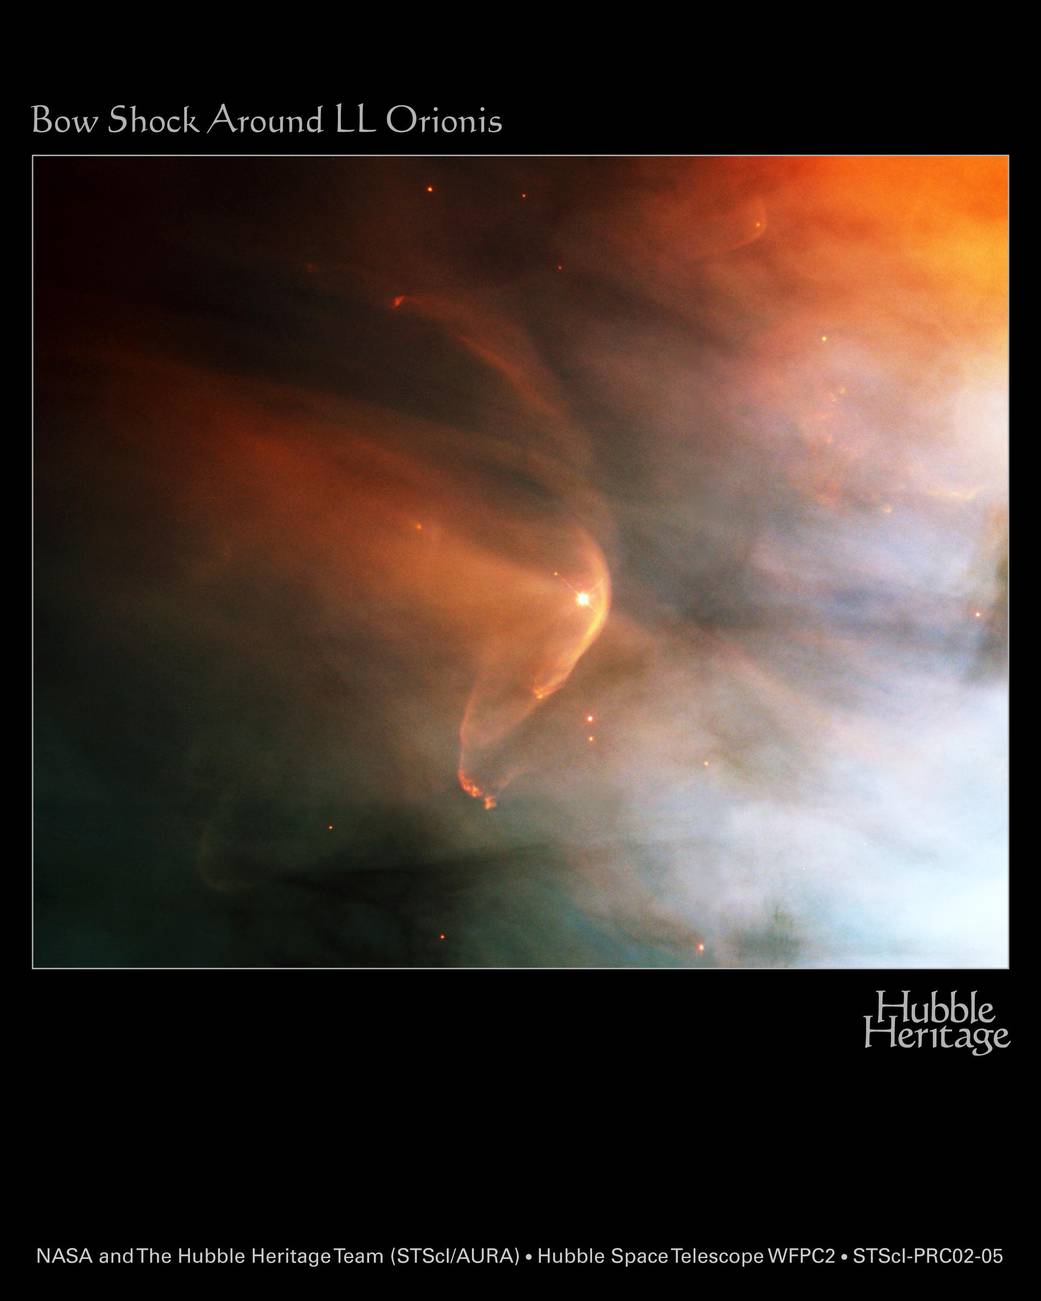 Bow Shock Near a Young Star